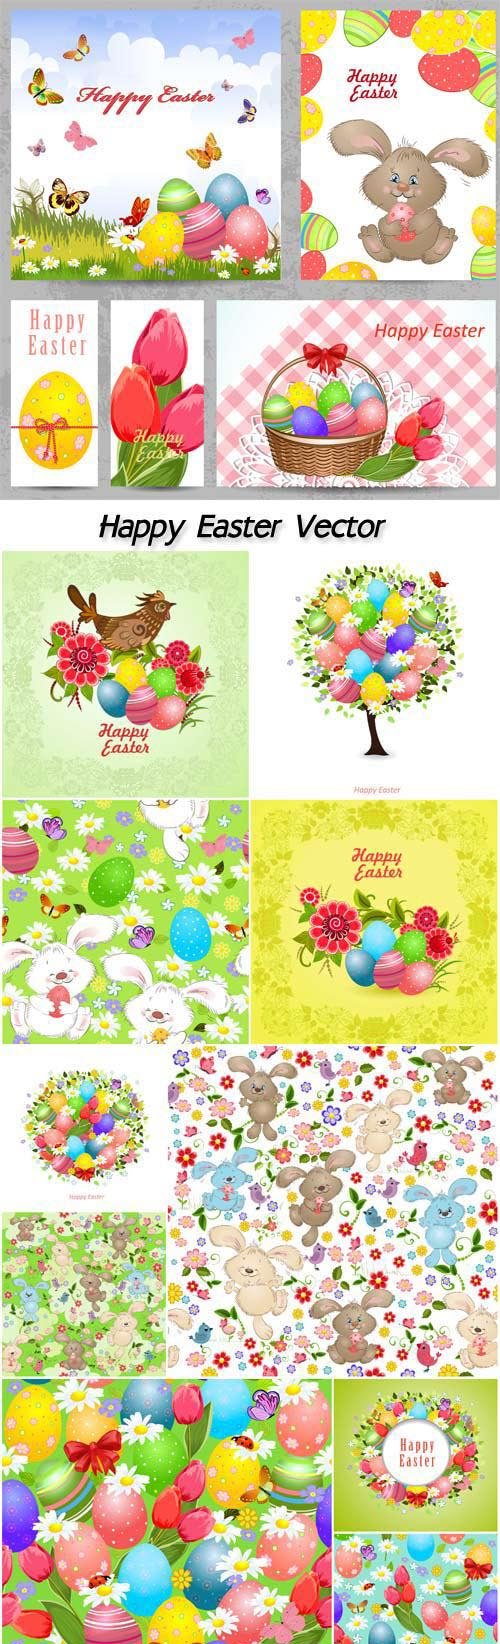 Happy Easter, Easter vector texture with rabbits